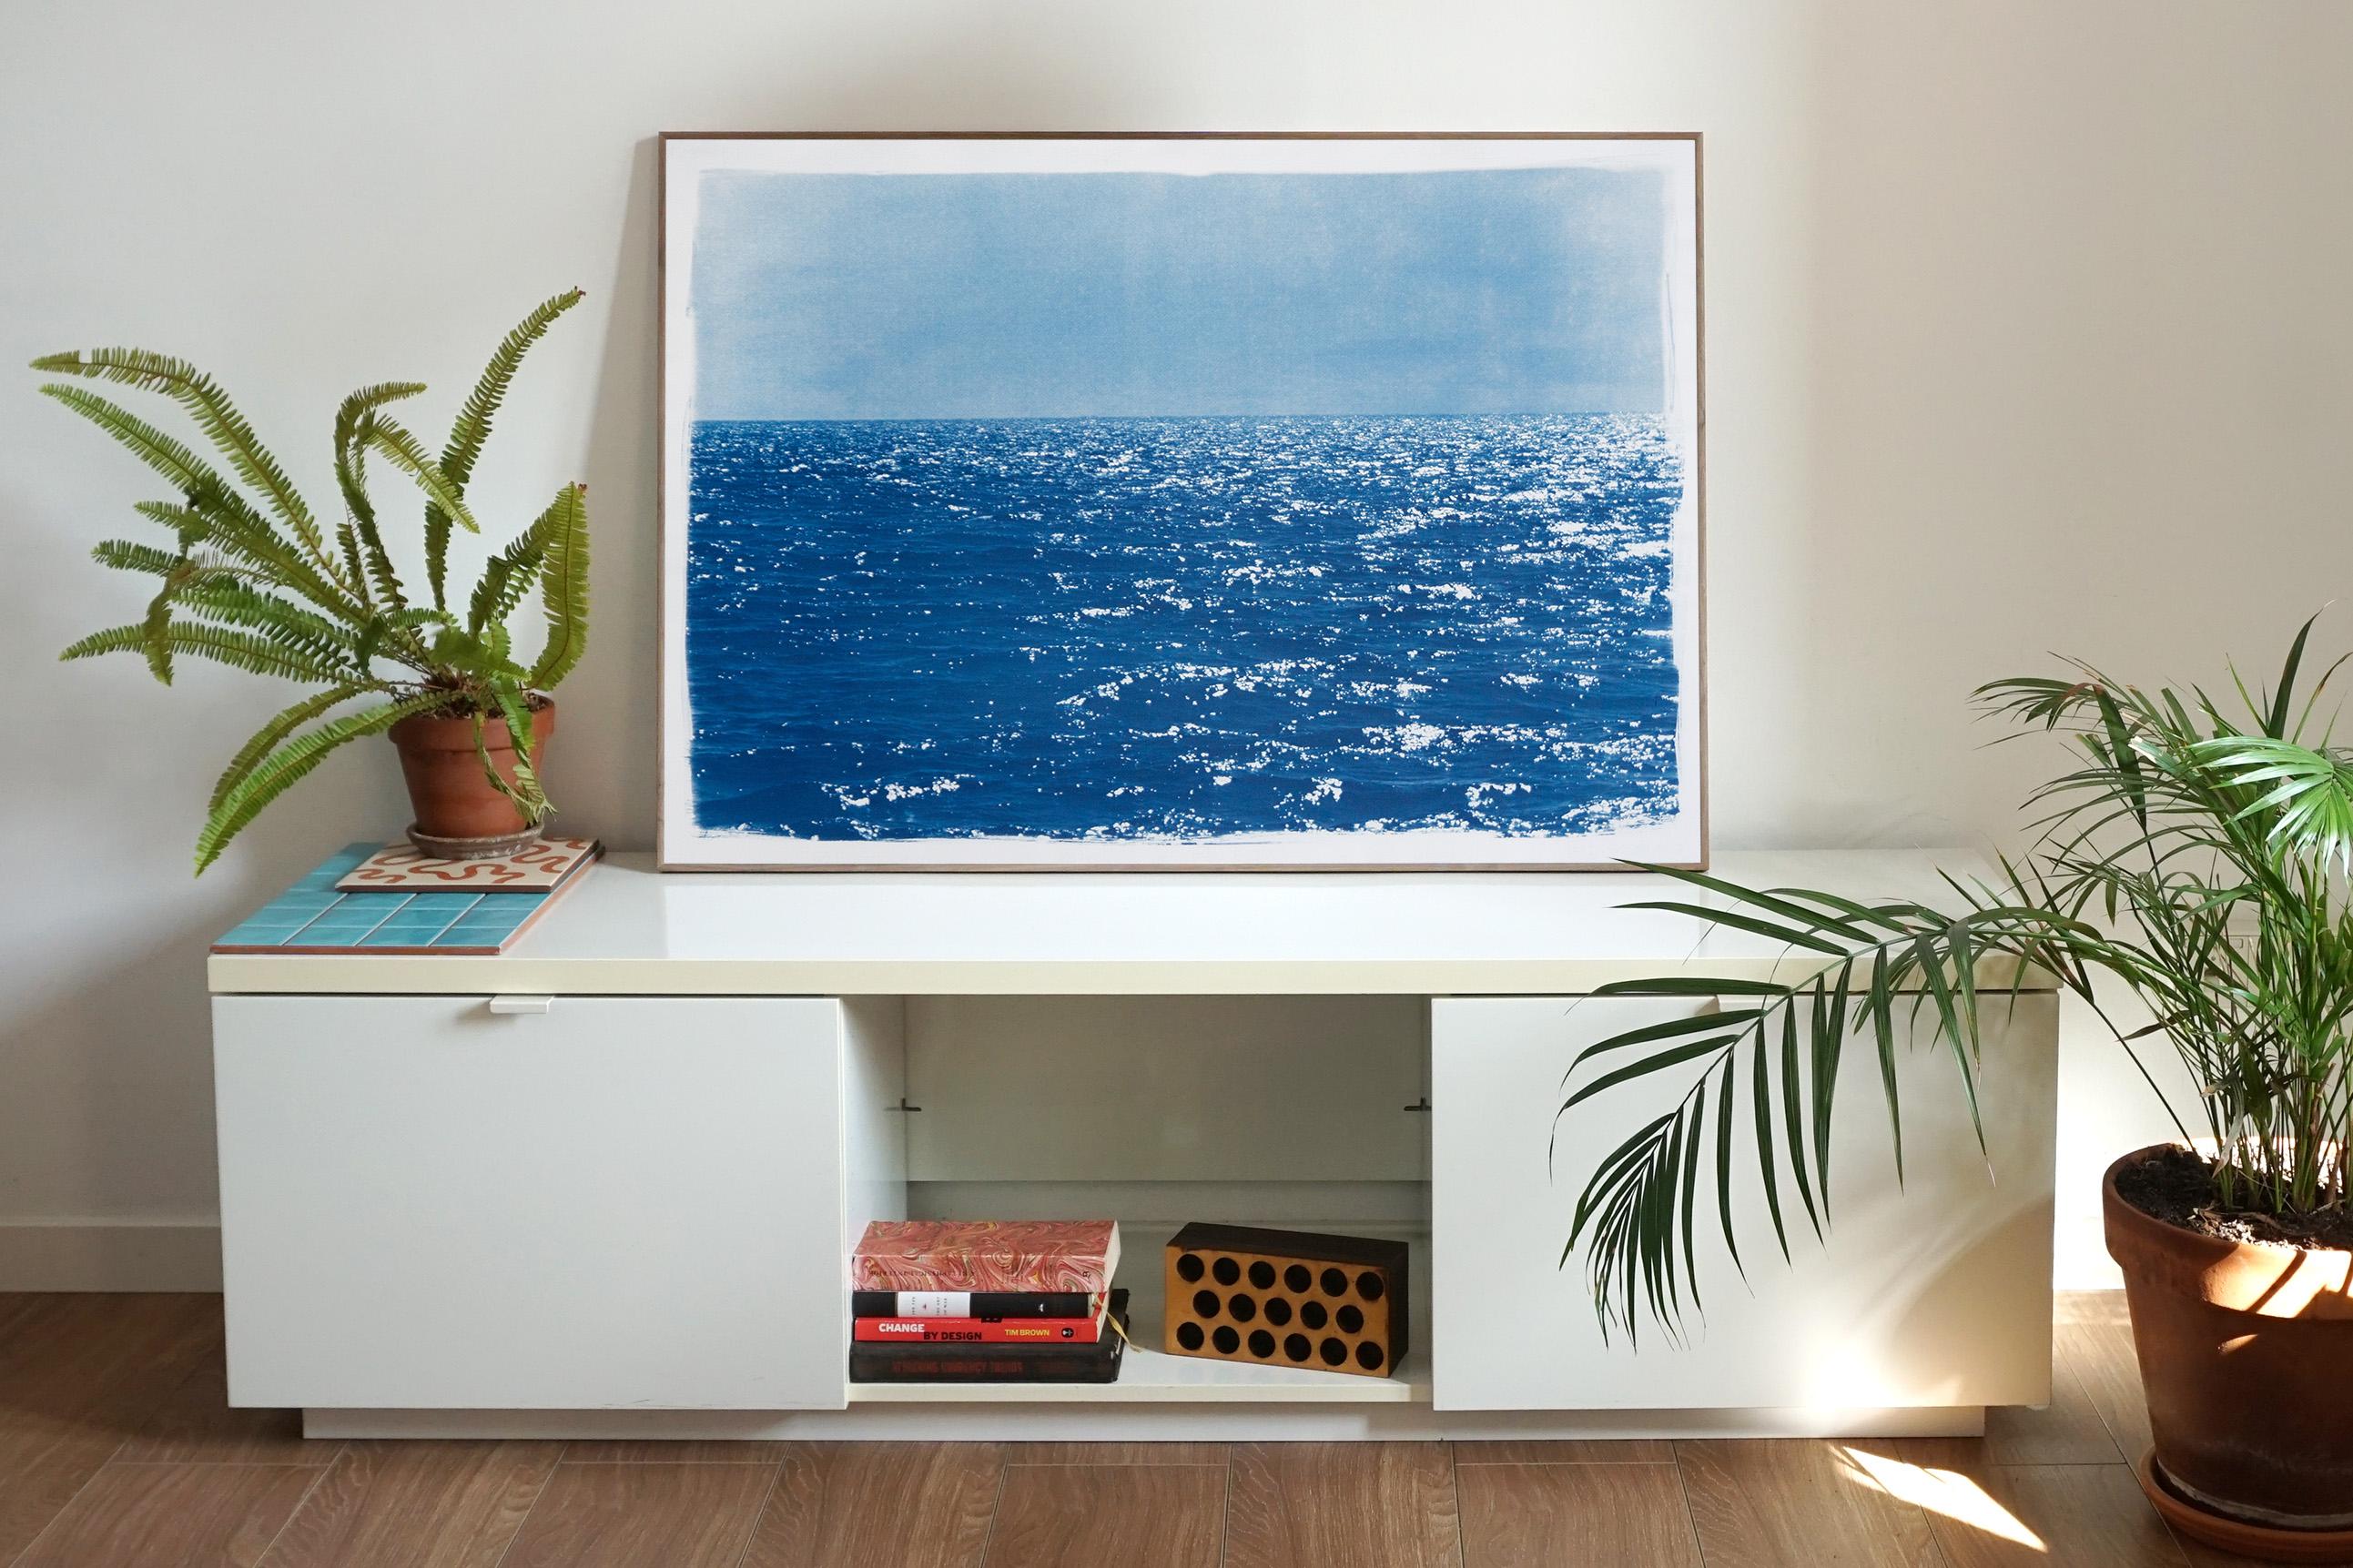 Coastal Blue Cyanotype of Day Time Seascape, Cold Waves, Nautical Painting Shore - Art by Kind of Cyan